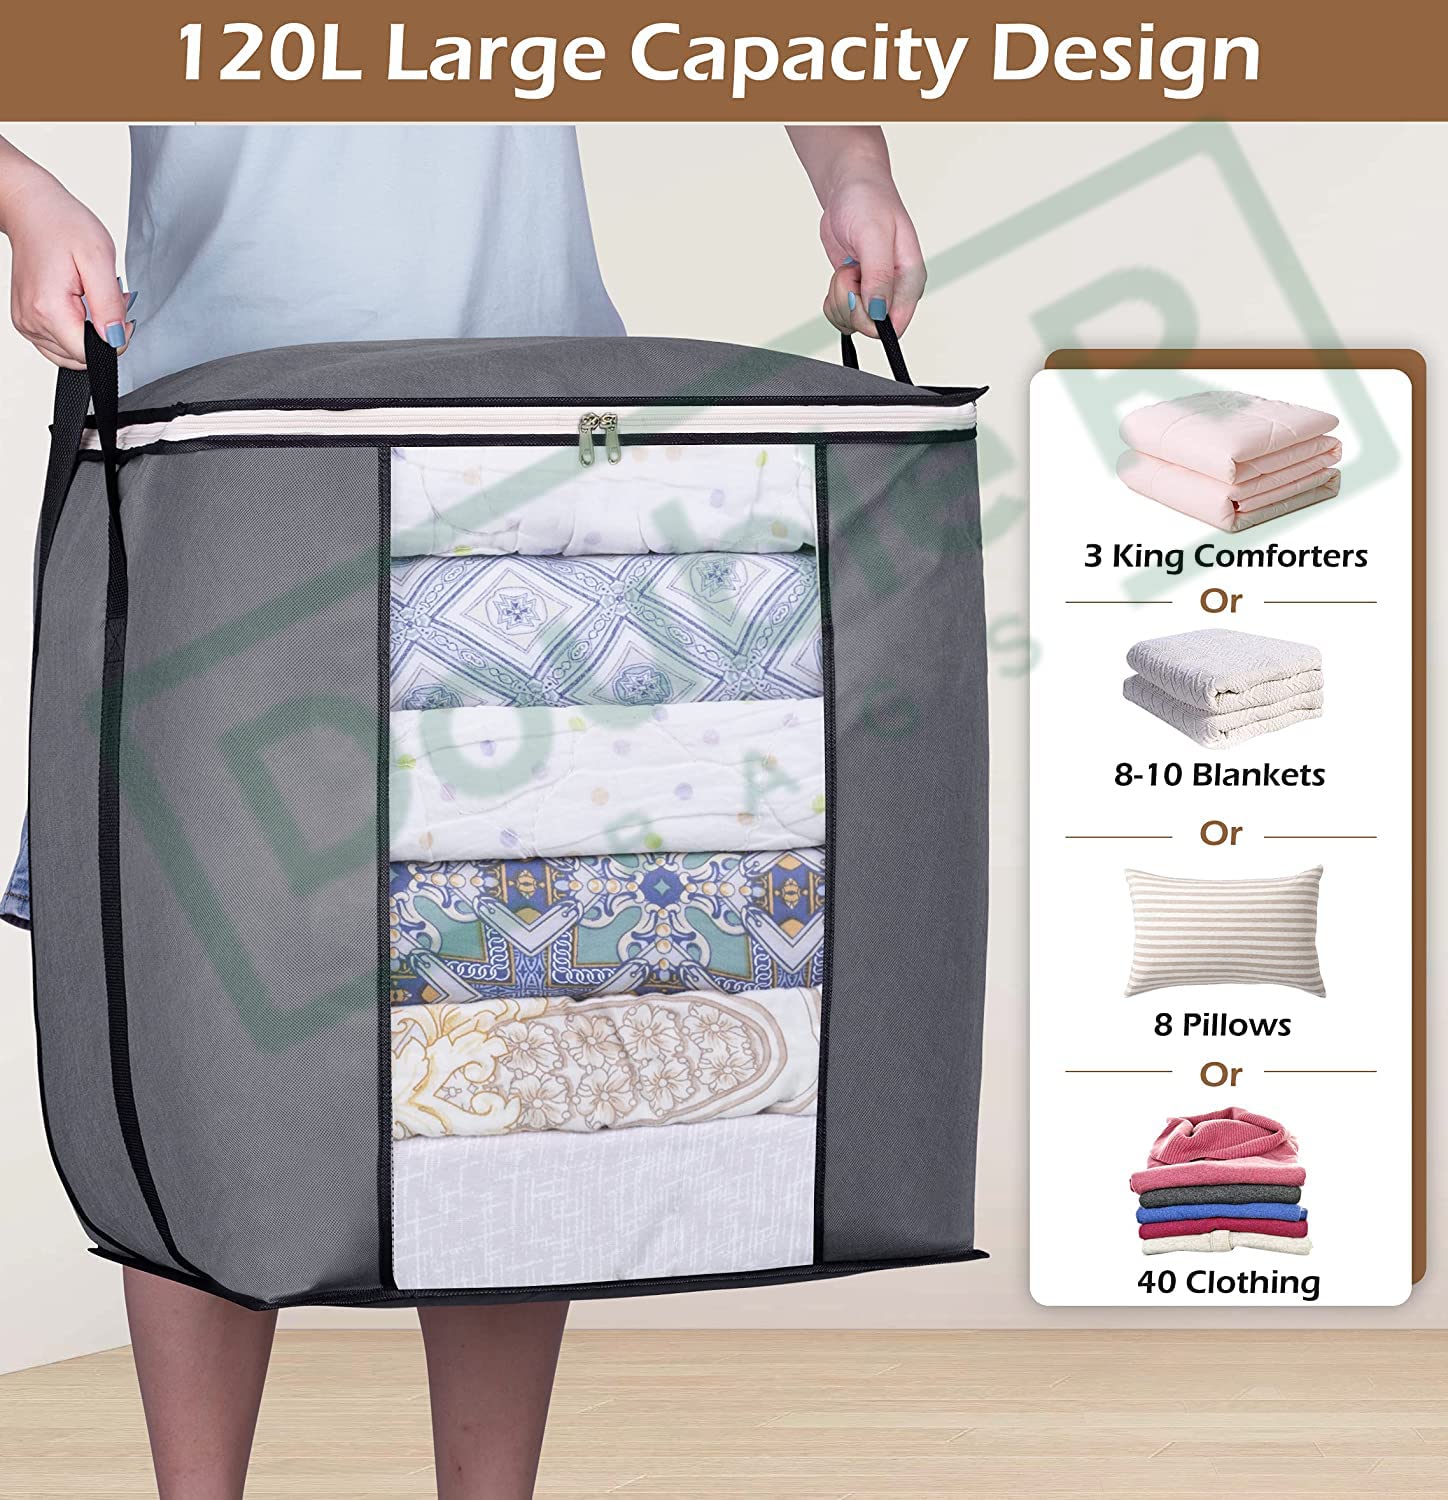 4 Large Non-woven Storage Bags With Windows, Foldable Clothes Storage With  Zipper And Handle, Under Bed Storage Bags For Quilts, Pillows, Clothes, Bla